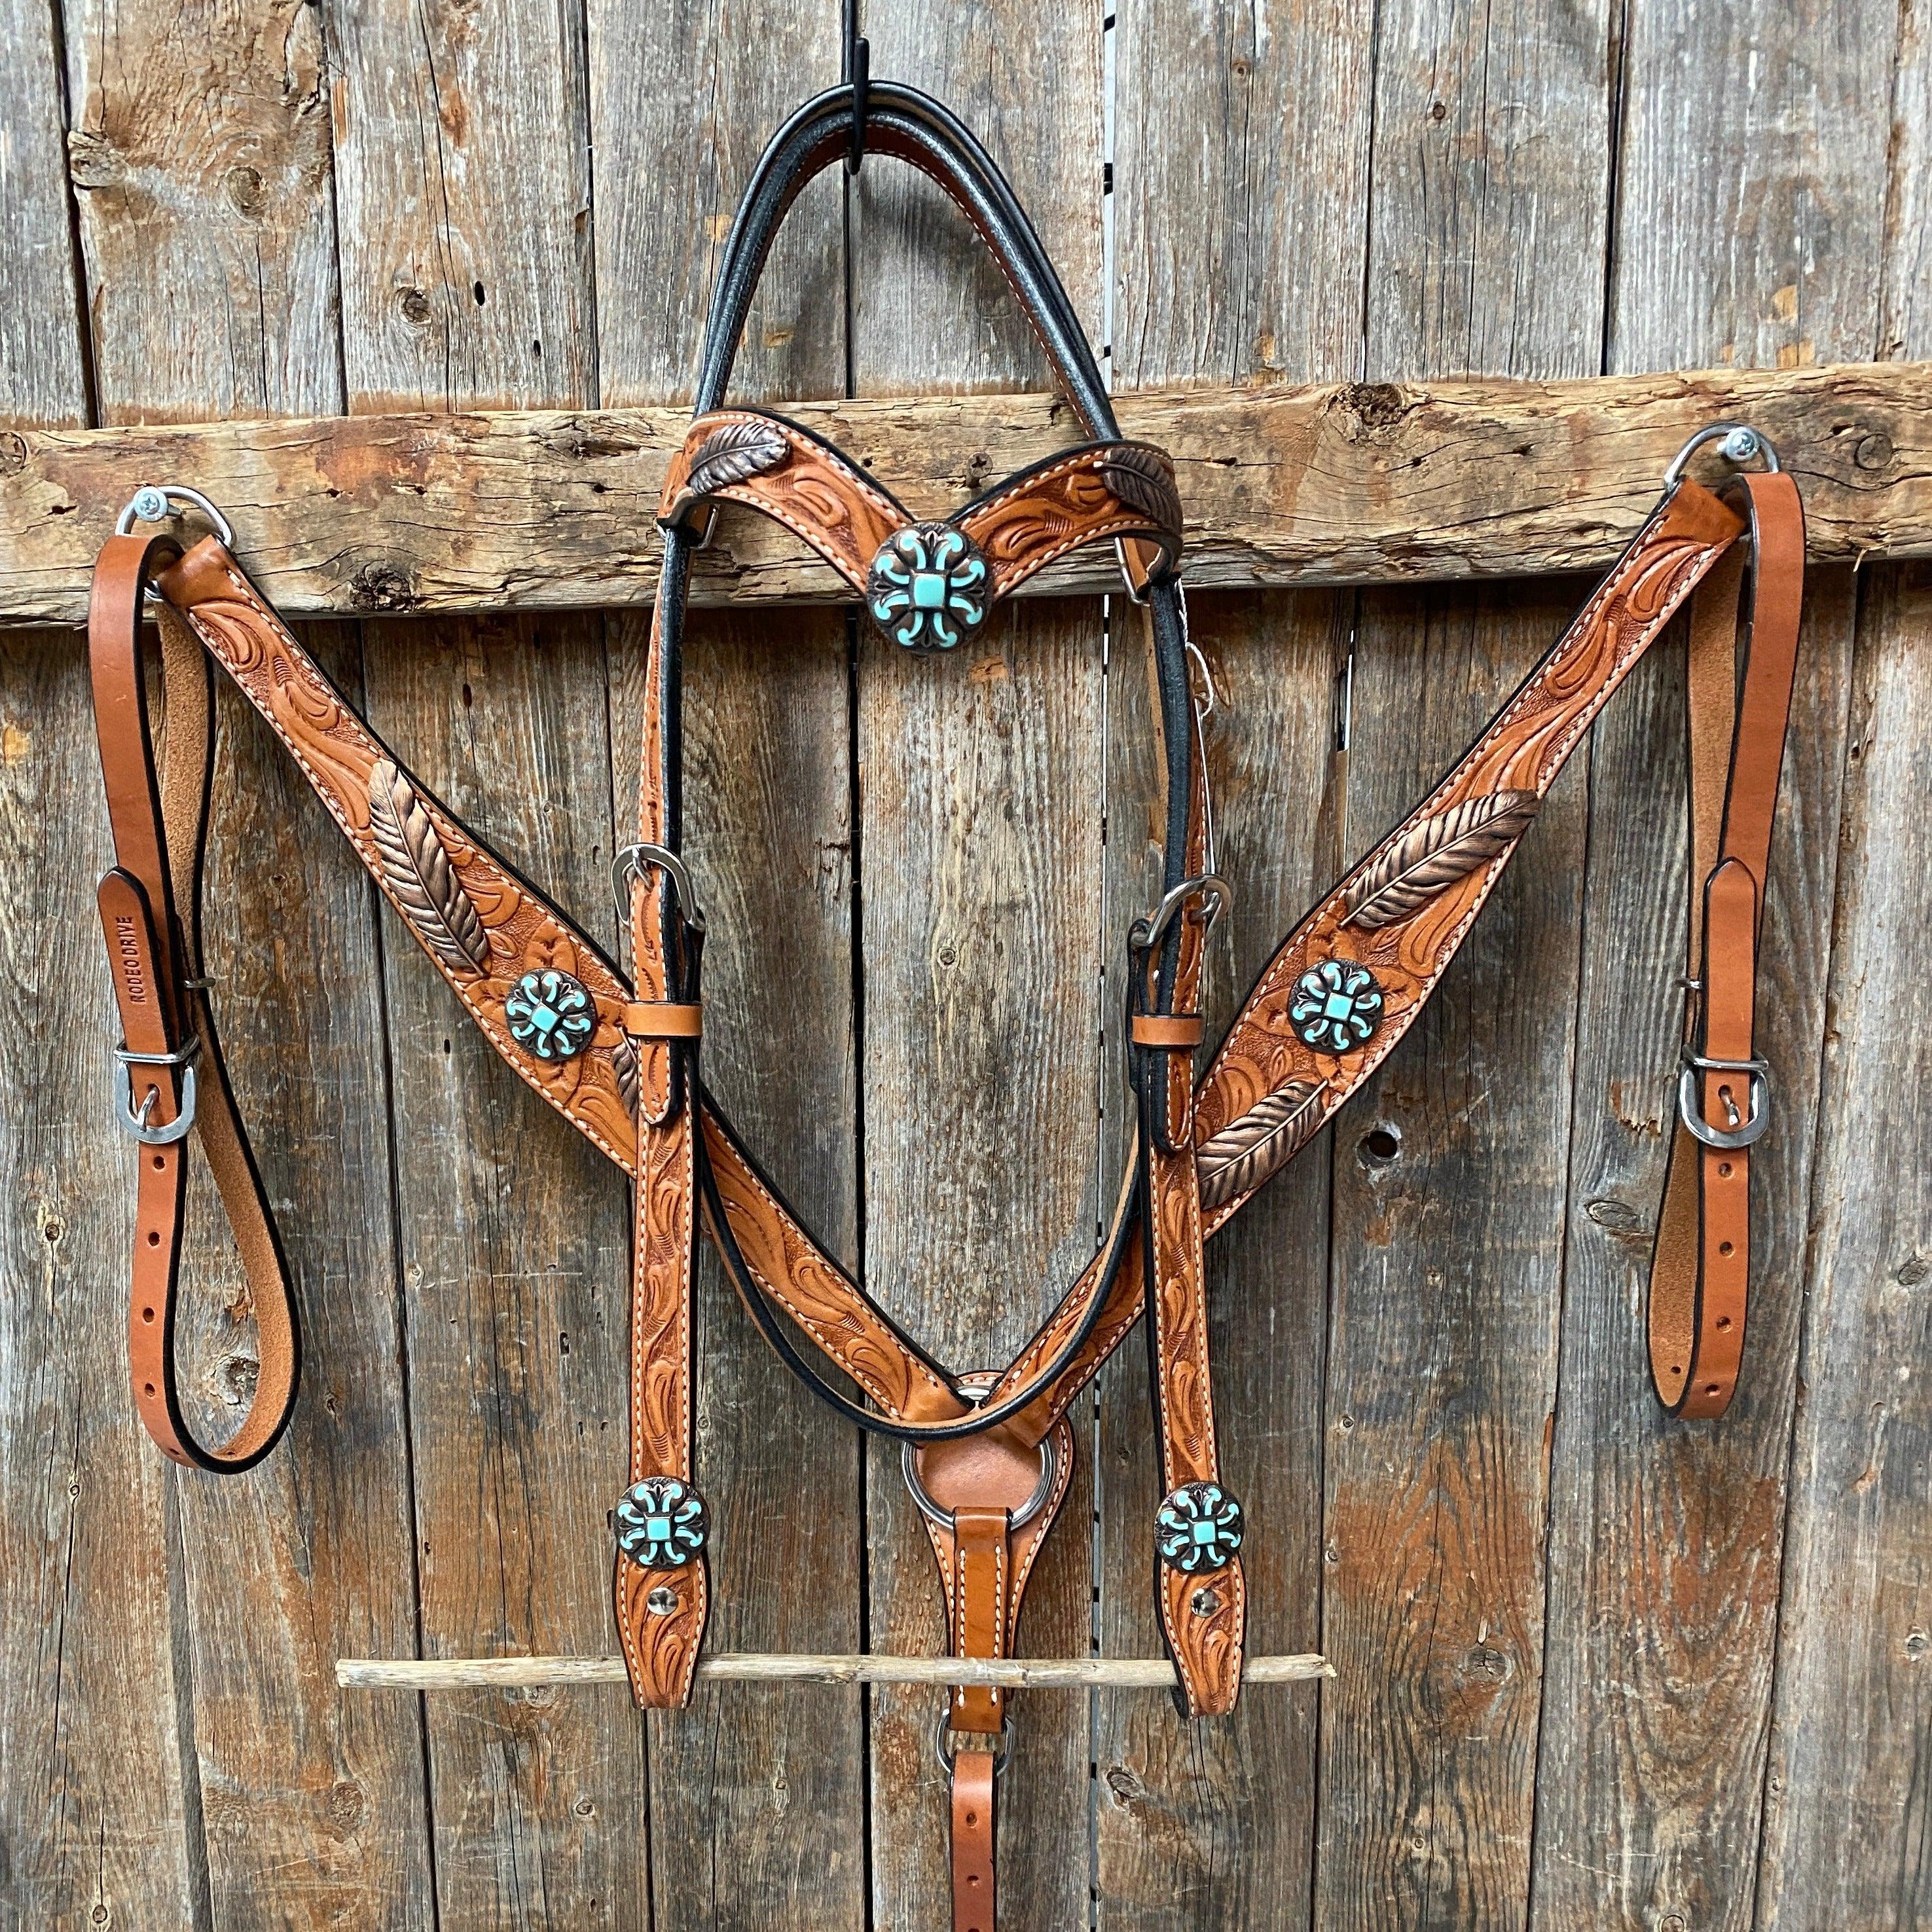 Light Oil V Brow Turquoise and Copper Browband & Breastcollar Tack Set #BBBC443 - RODEO DRIVE